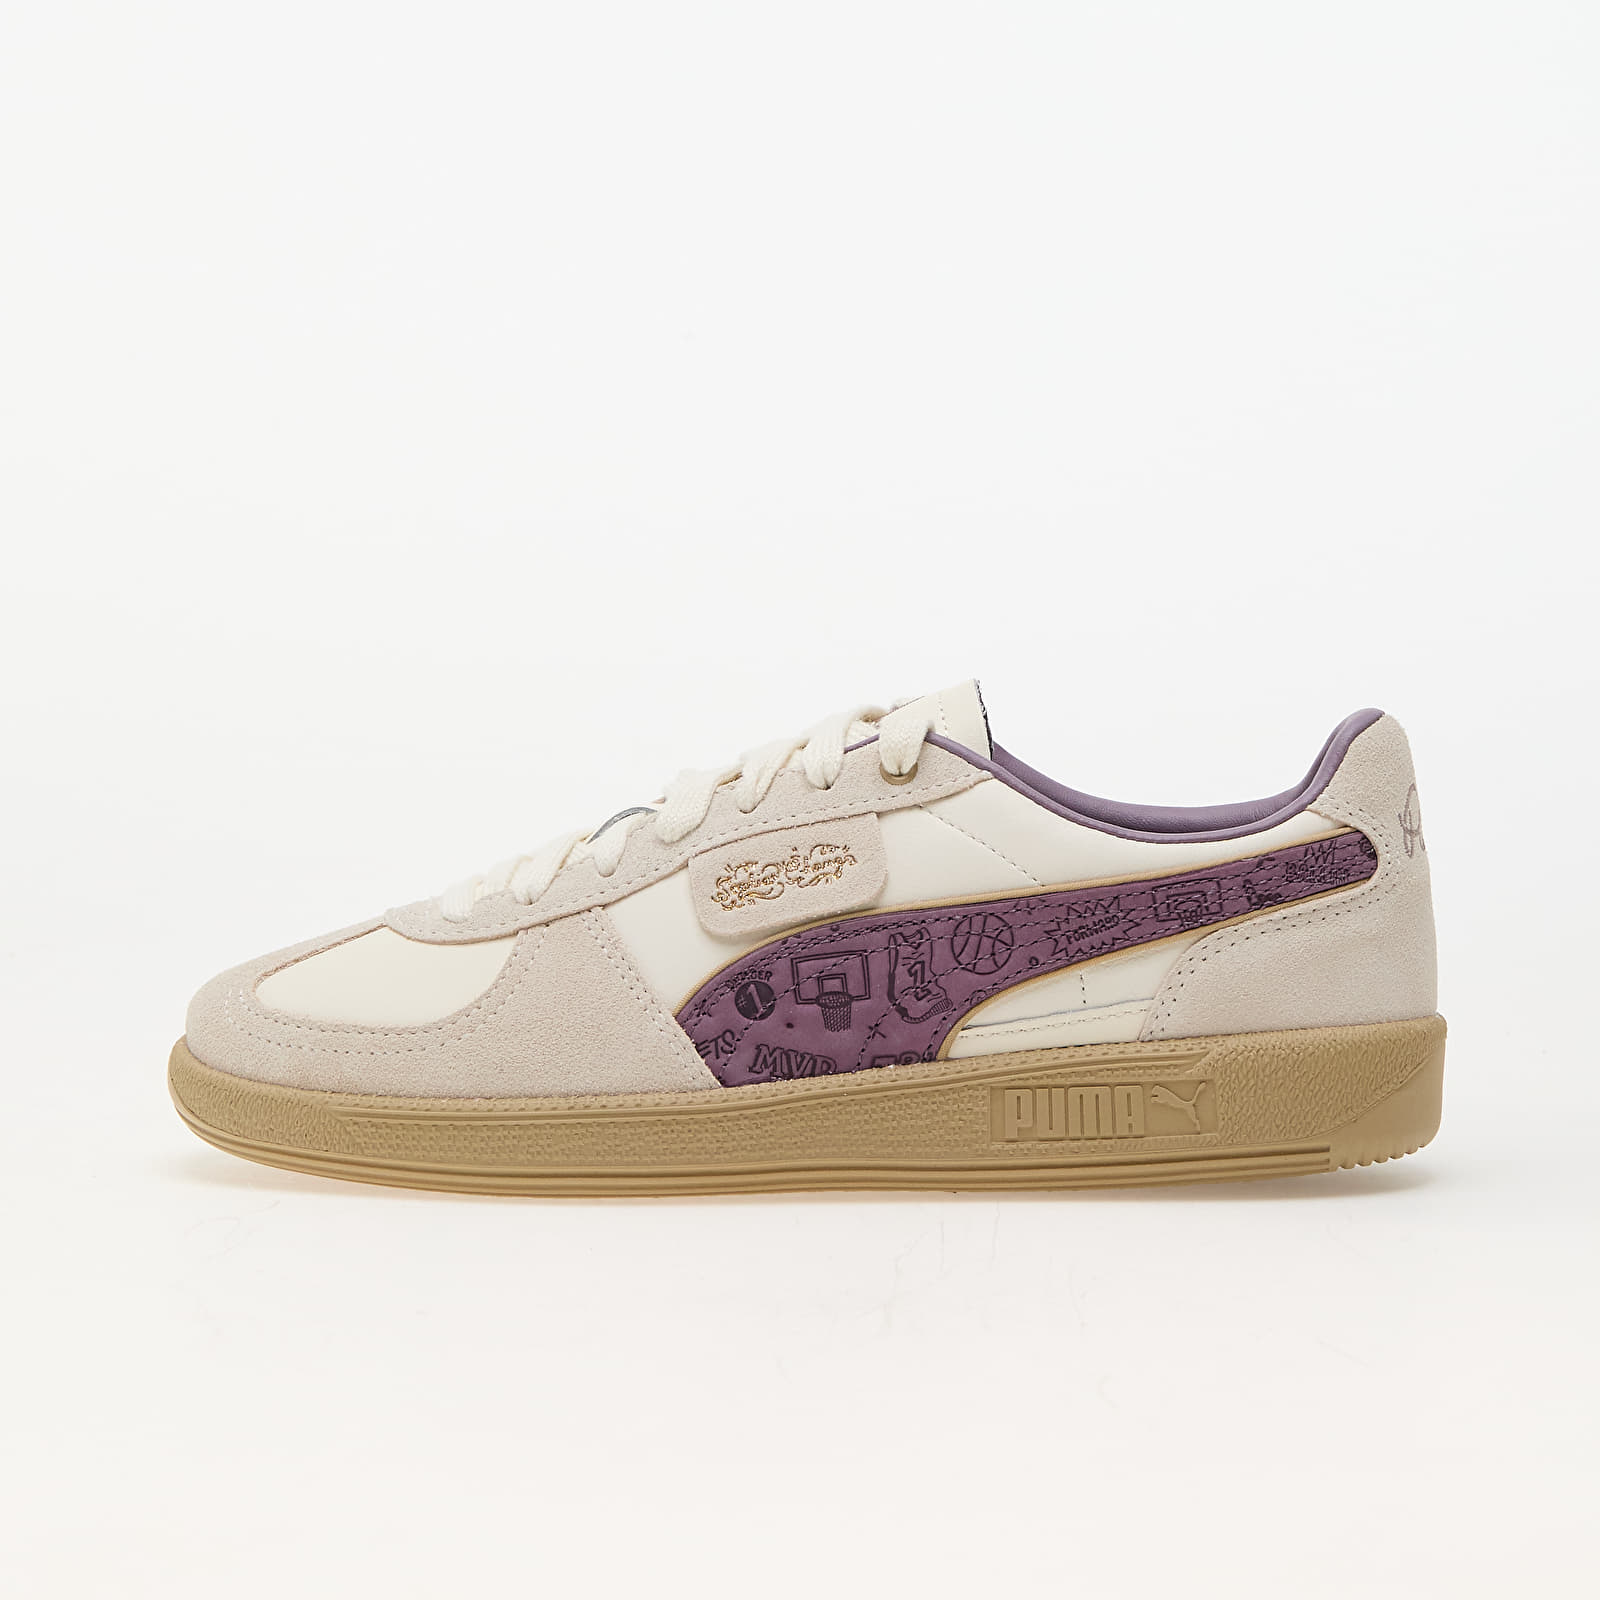 Chaussures et baskets homme Puma x Sophia Chang Palermo White